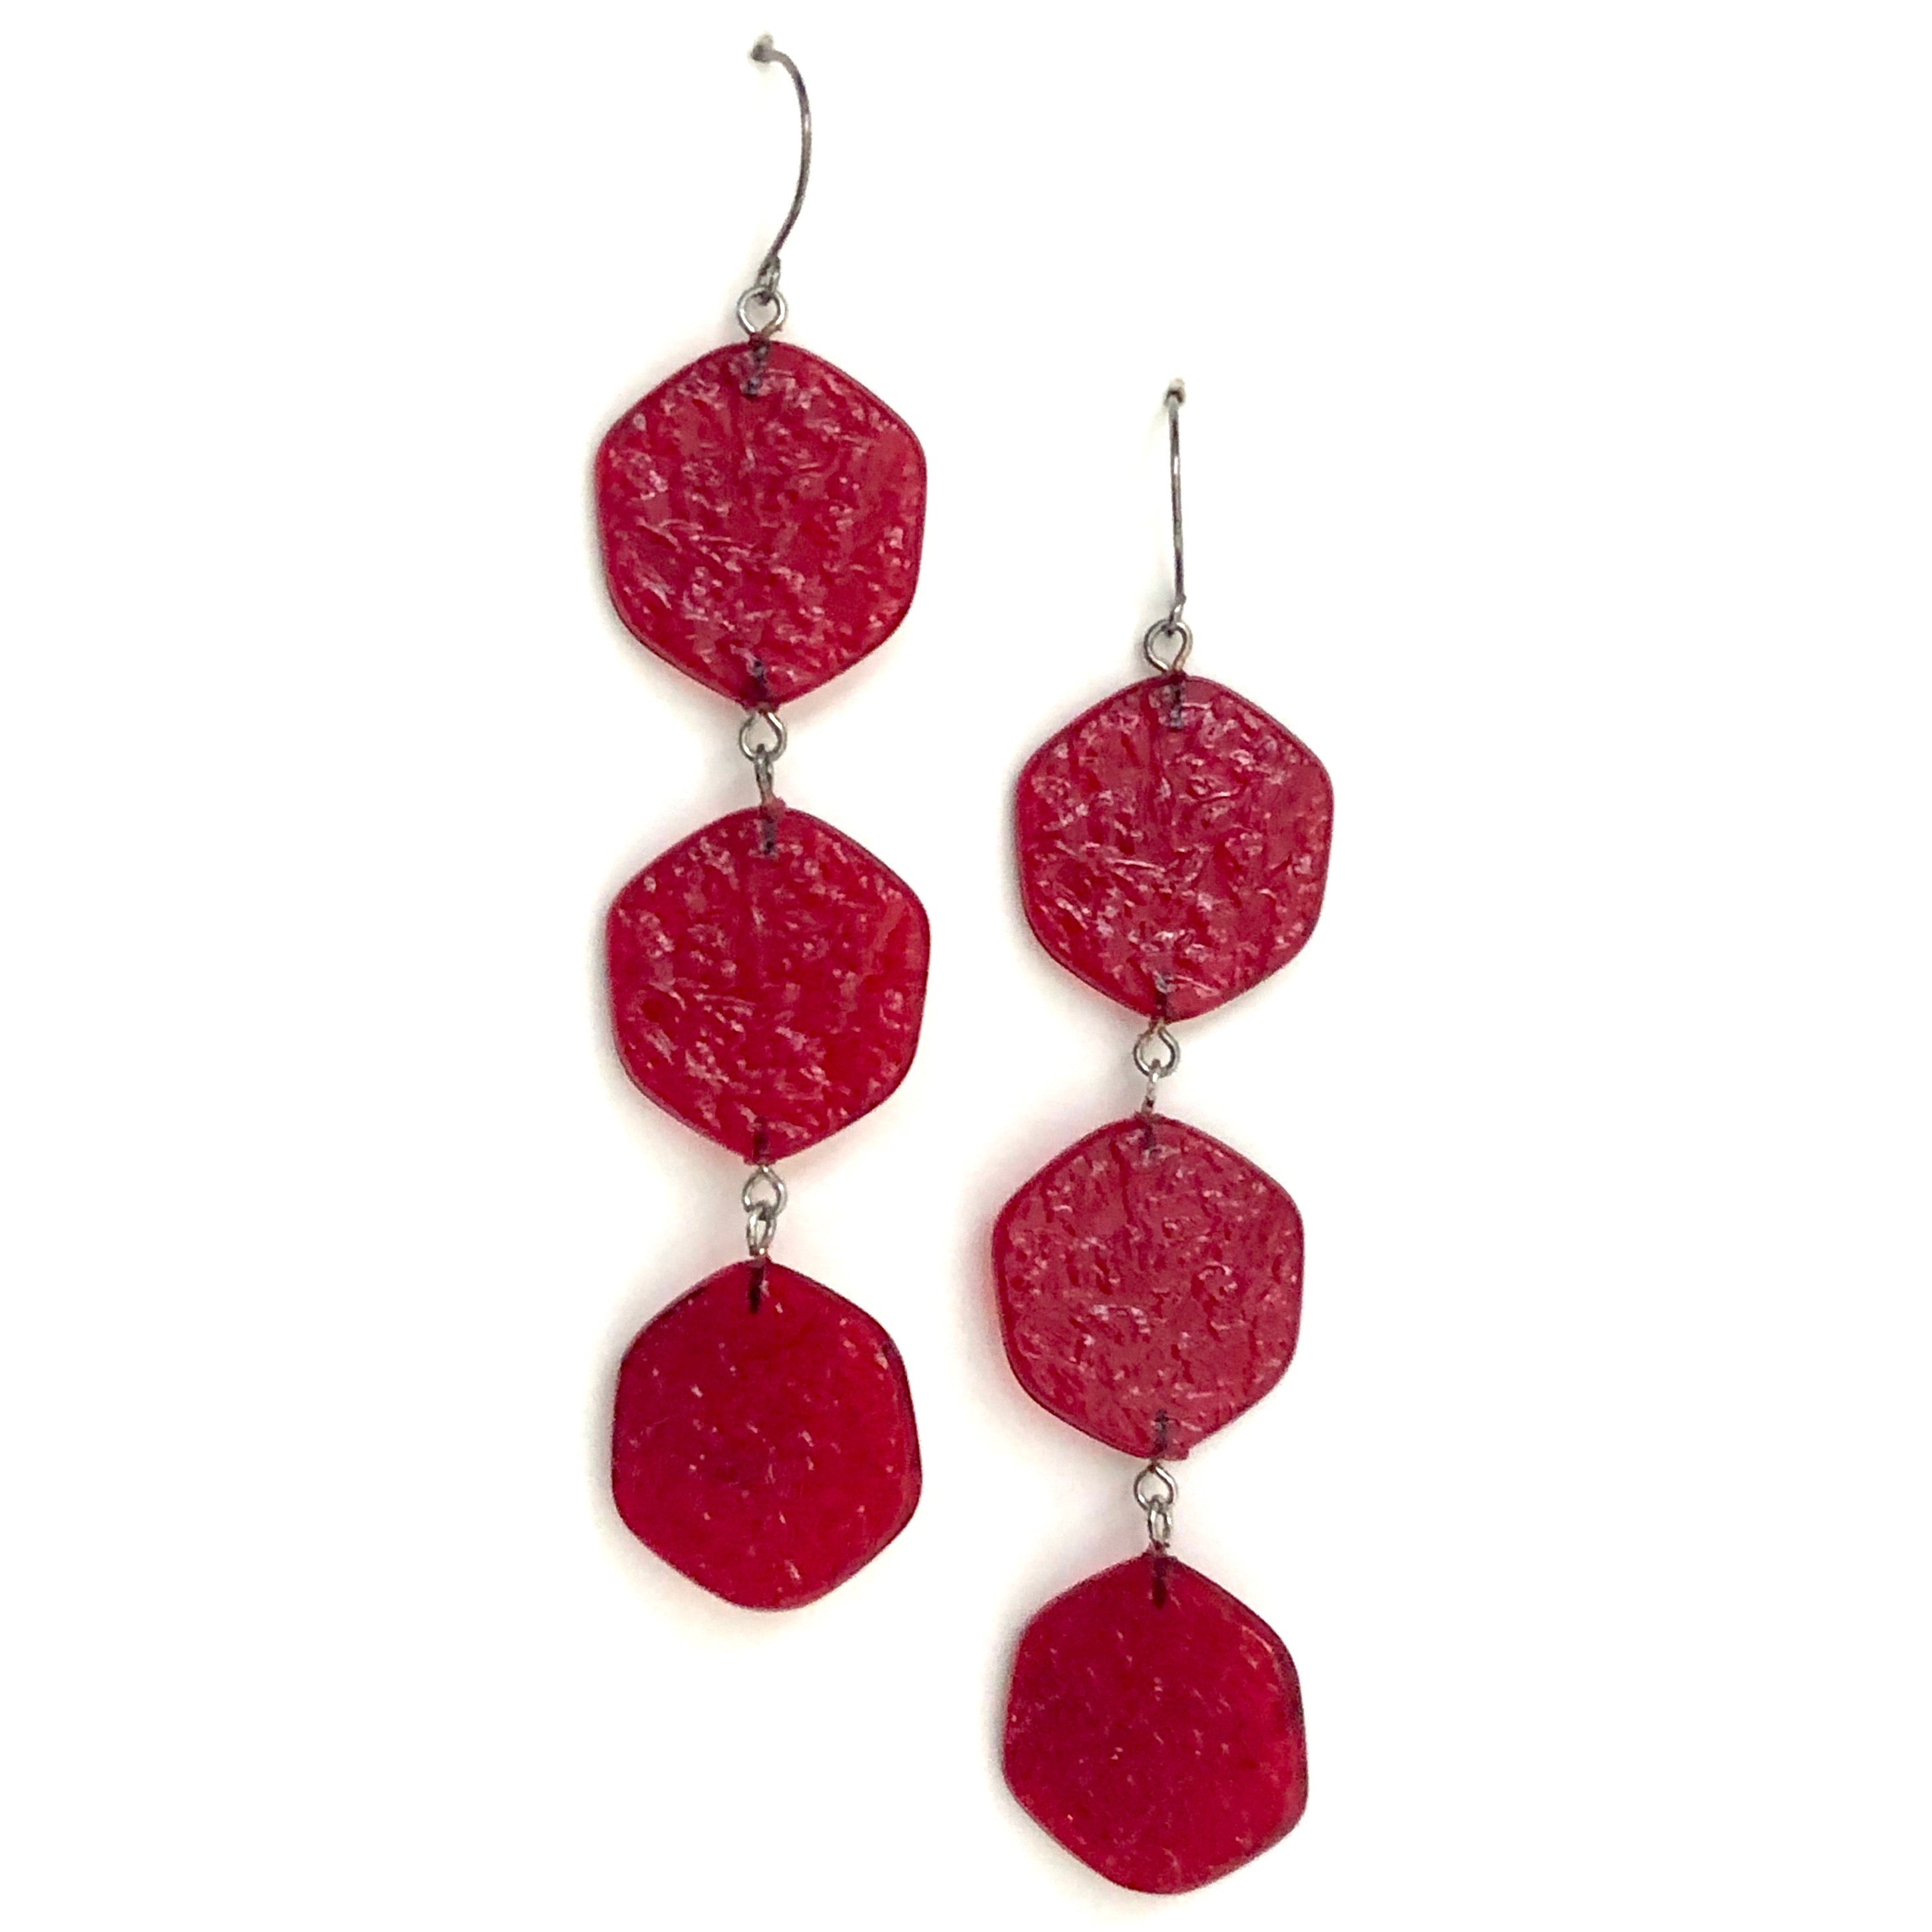 textured red earrings